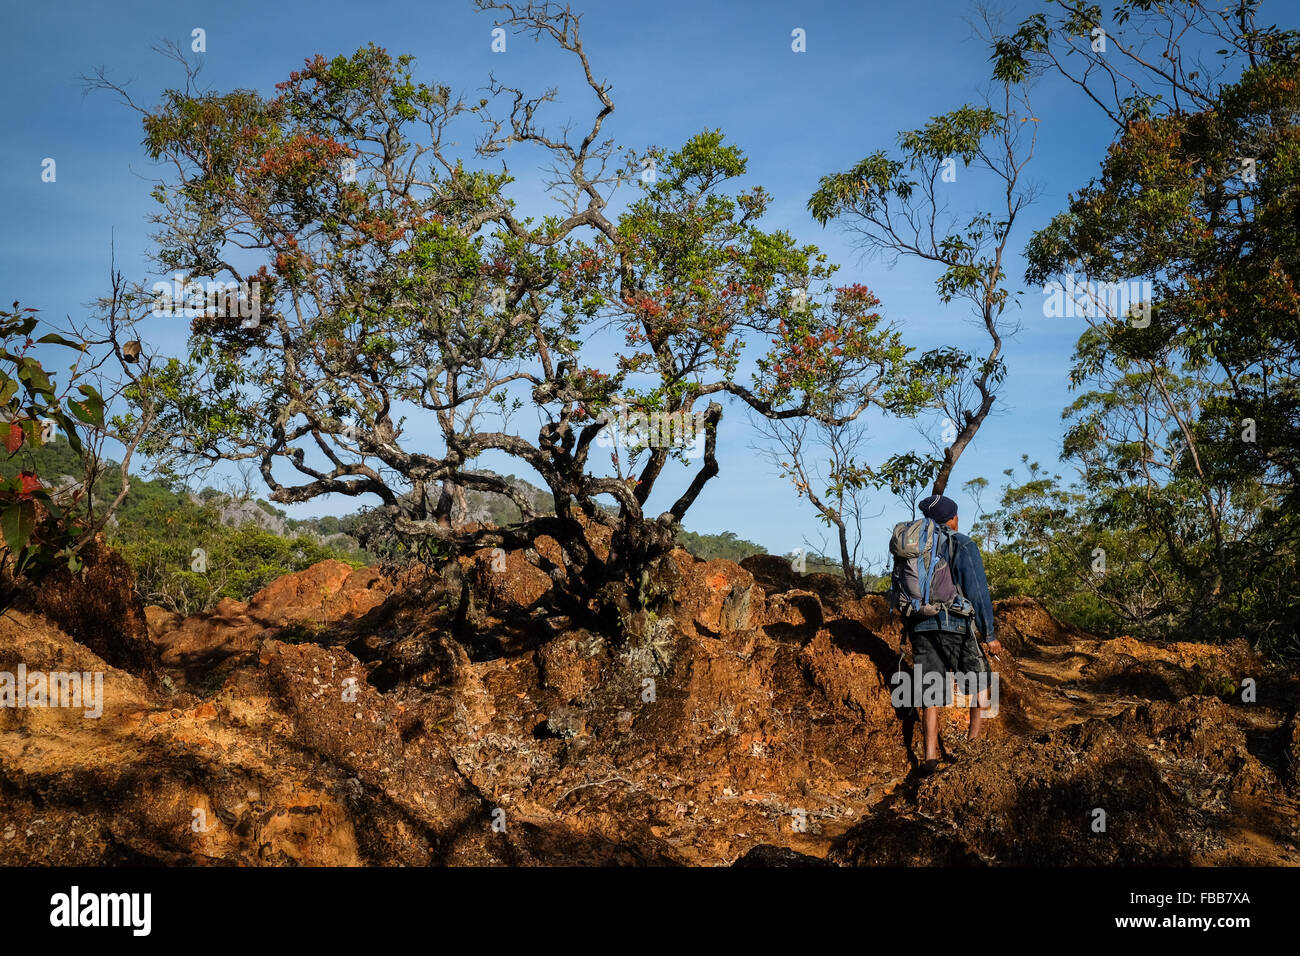 A villager and part time ecotourism guide is standing close to dwarf trees in Fatumnasi nature reserve, Mount Mutis, West Timor, Indonesia. Stock Photo